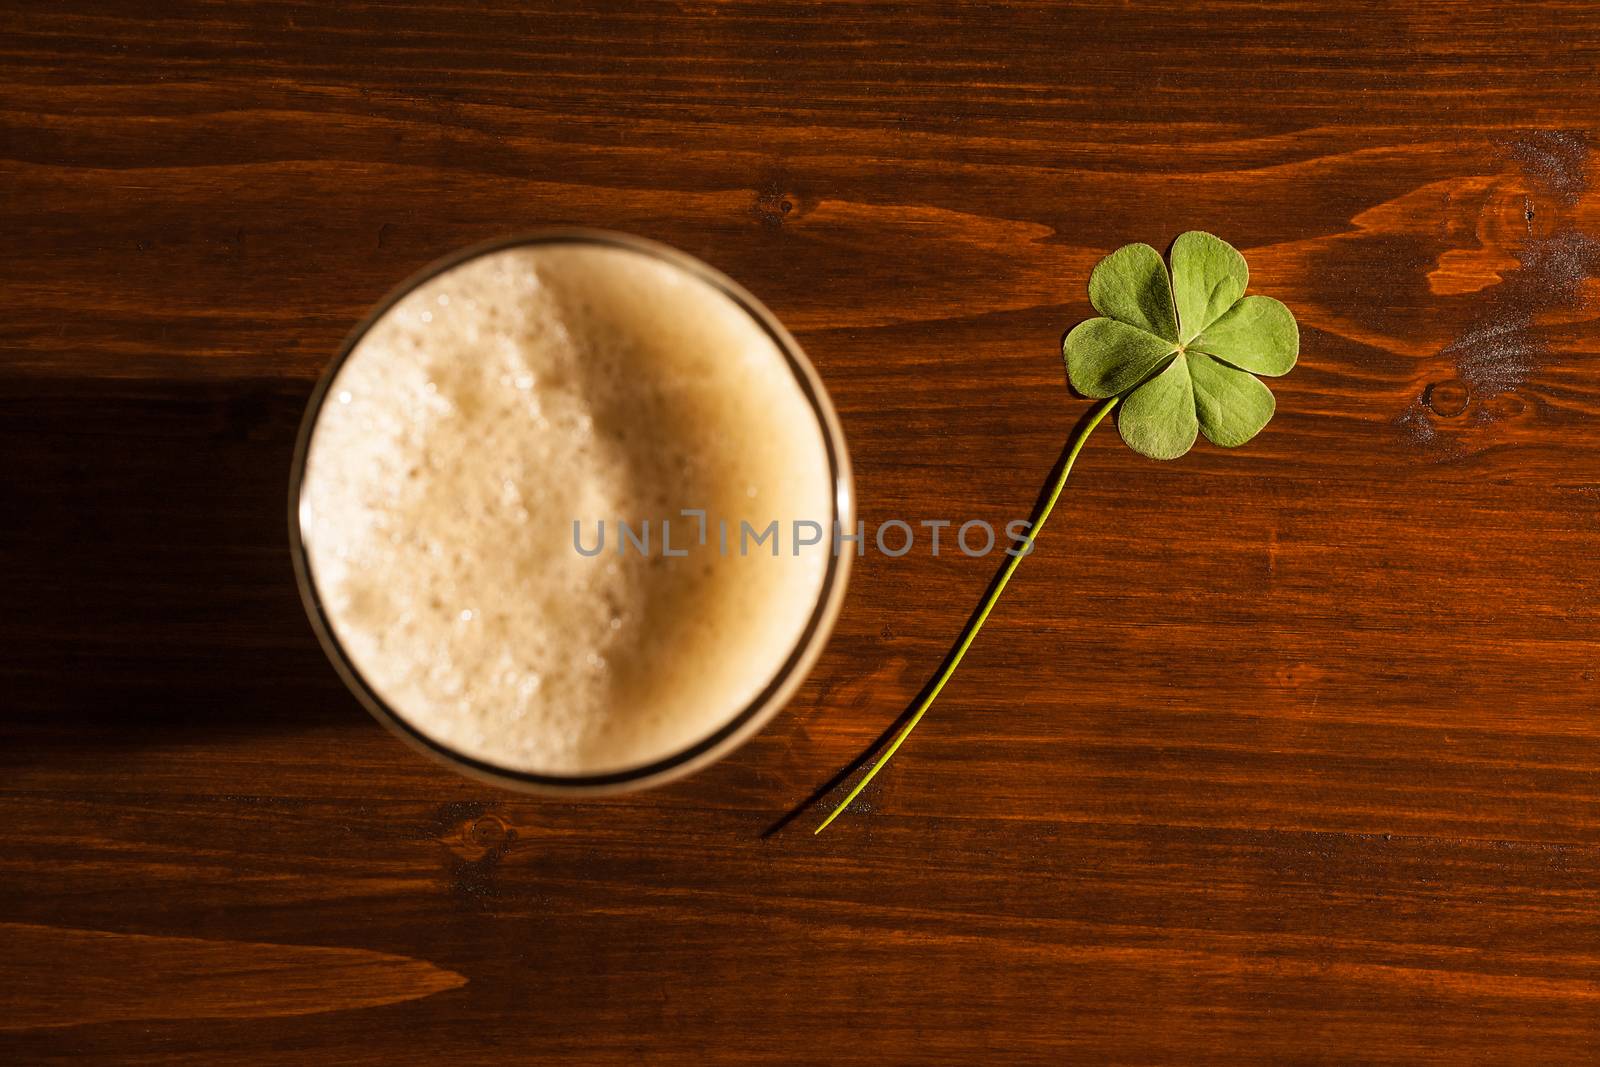 Pint of black beer and a shamrock by LuigiMorbidelli